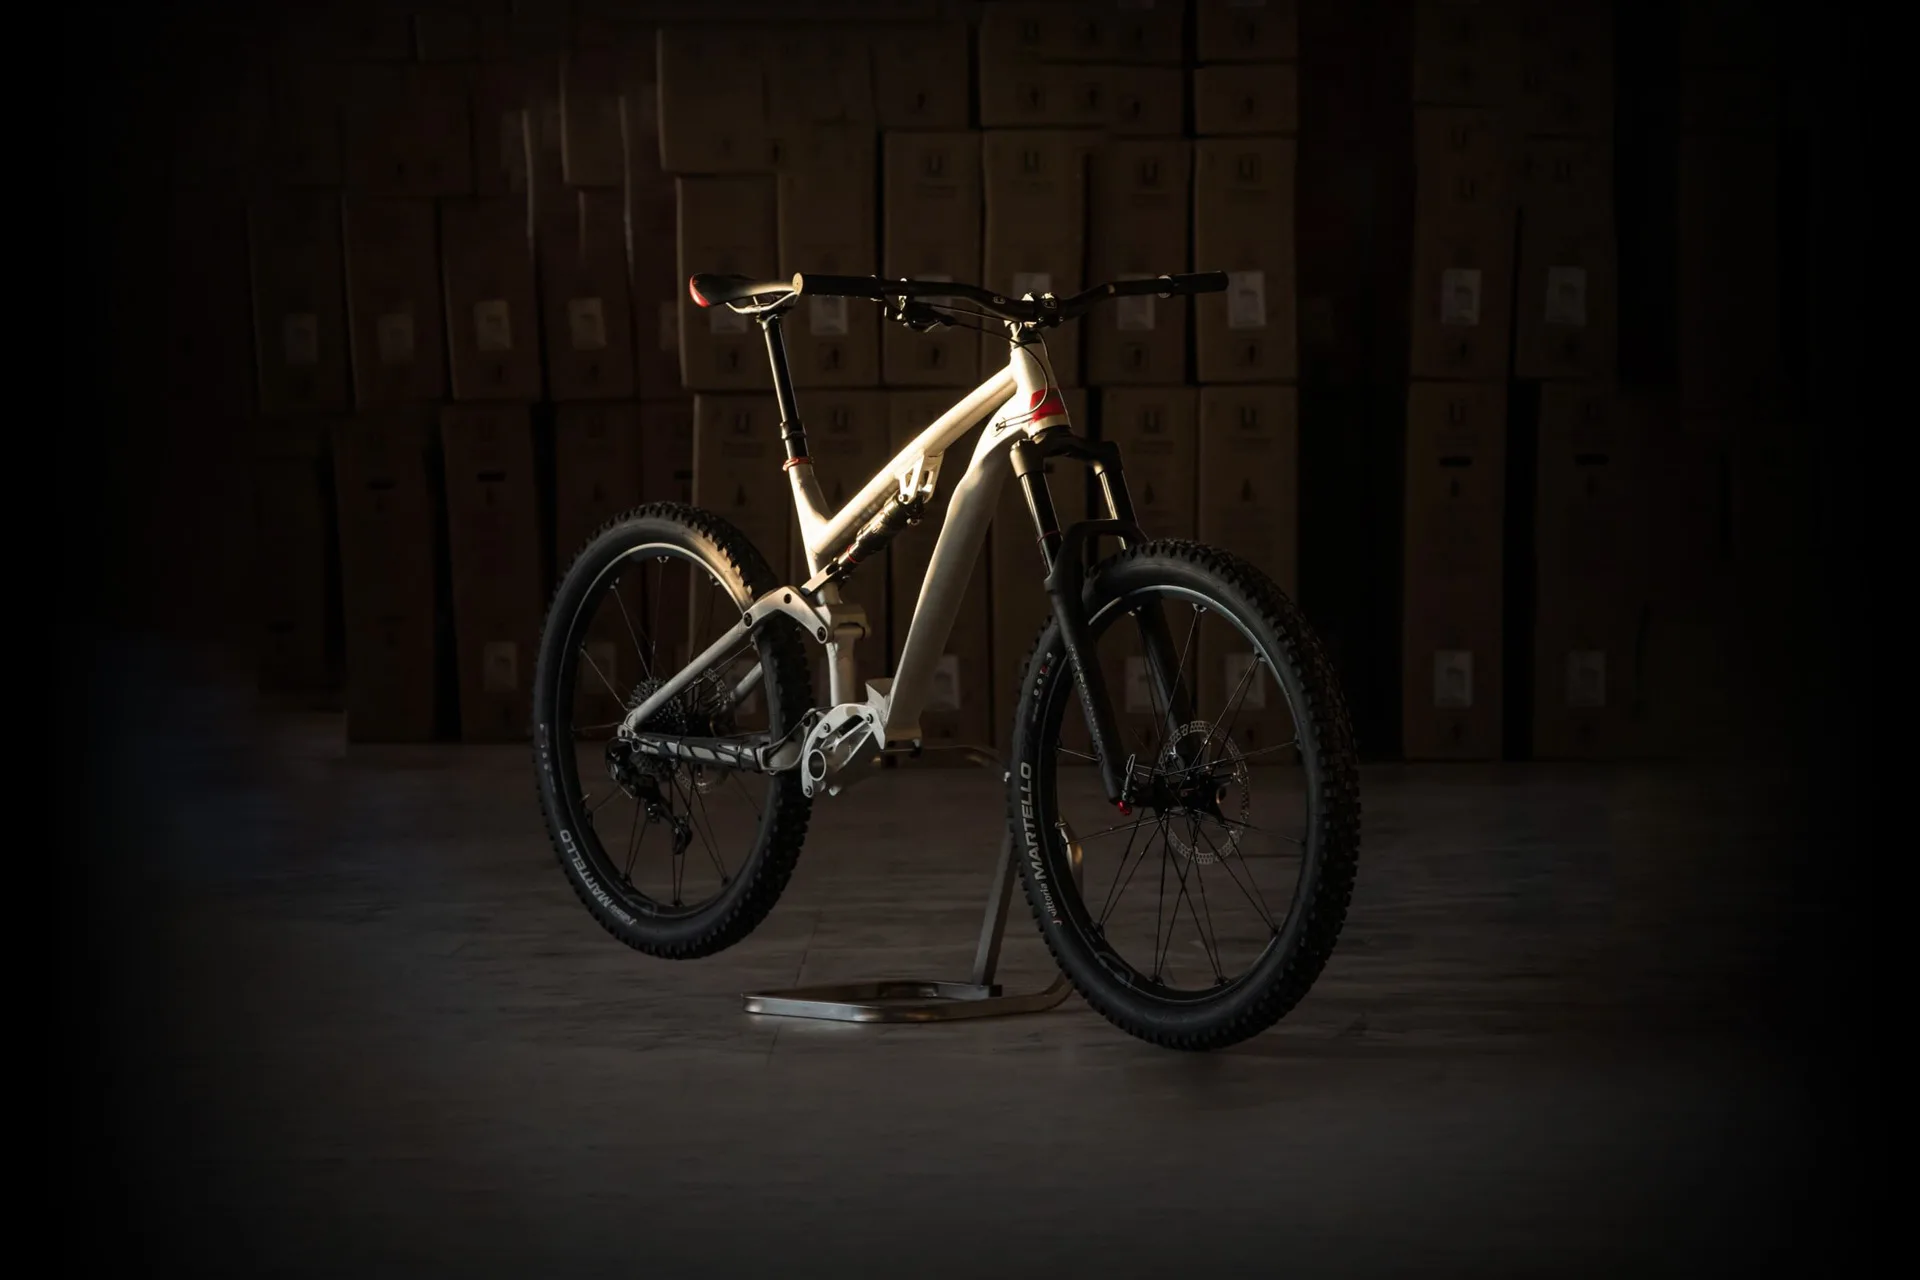 Thok miniature - WHAT LIES BEHIND THE CREATION OF A WINNING E-MTB: “I AM GOING TO REVEAL THE SECRETS OF THE ITALIAN BRAND THOK”